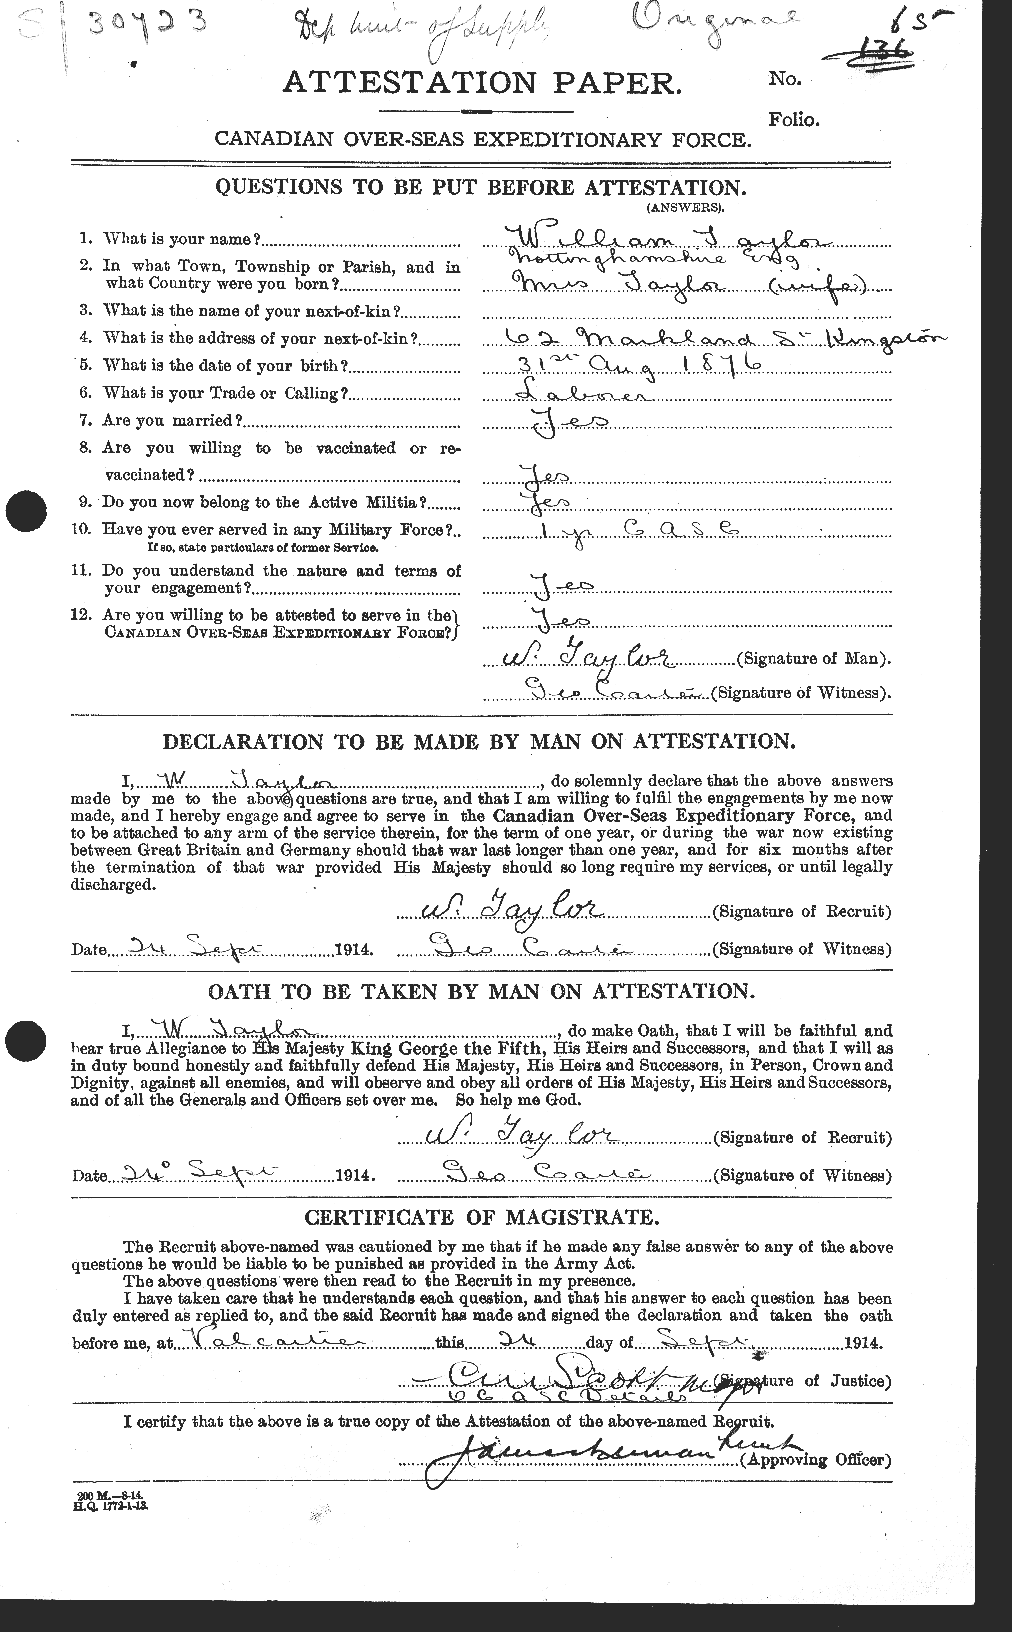 Personnel Records of the First World War - CEF 628108a